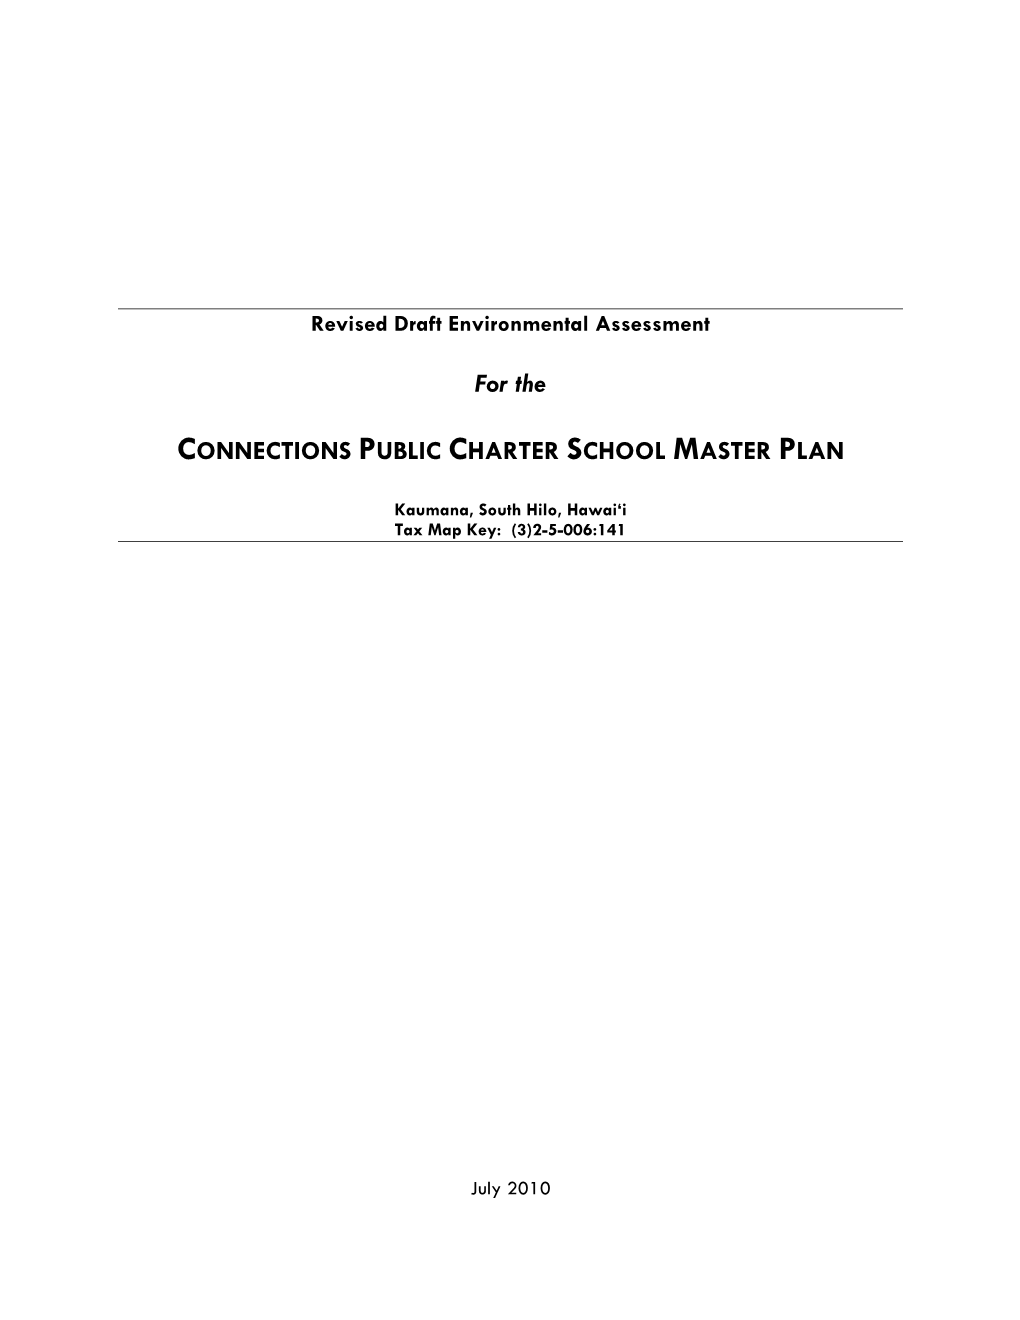 For the CONNECTIONS PUBLIC CHARTER SCHOOL MASTER PLAN